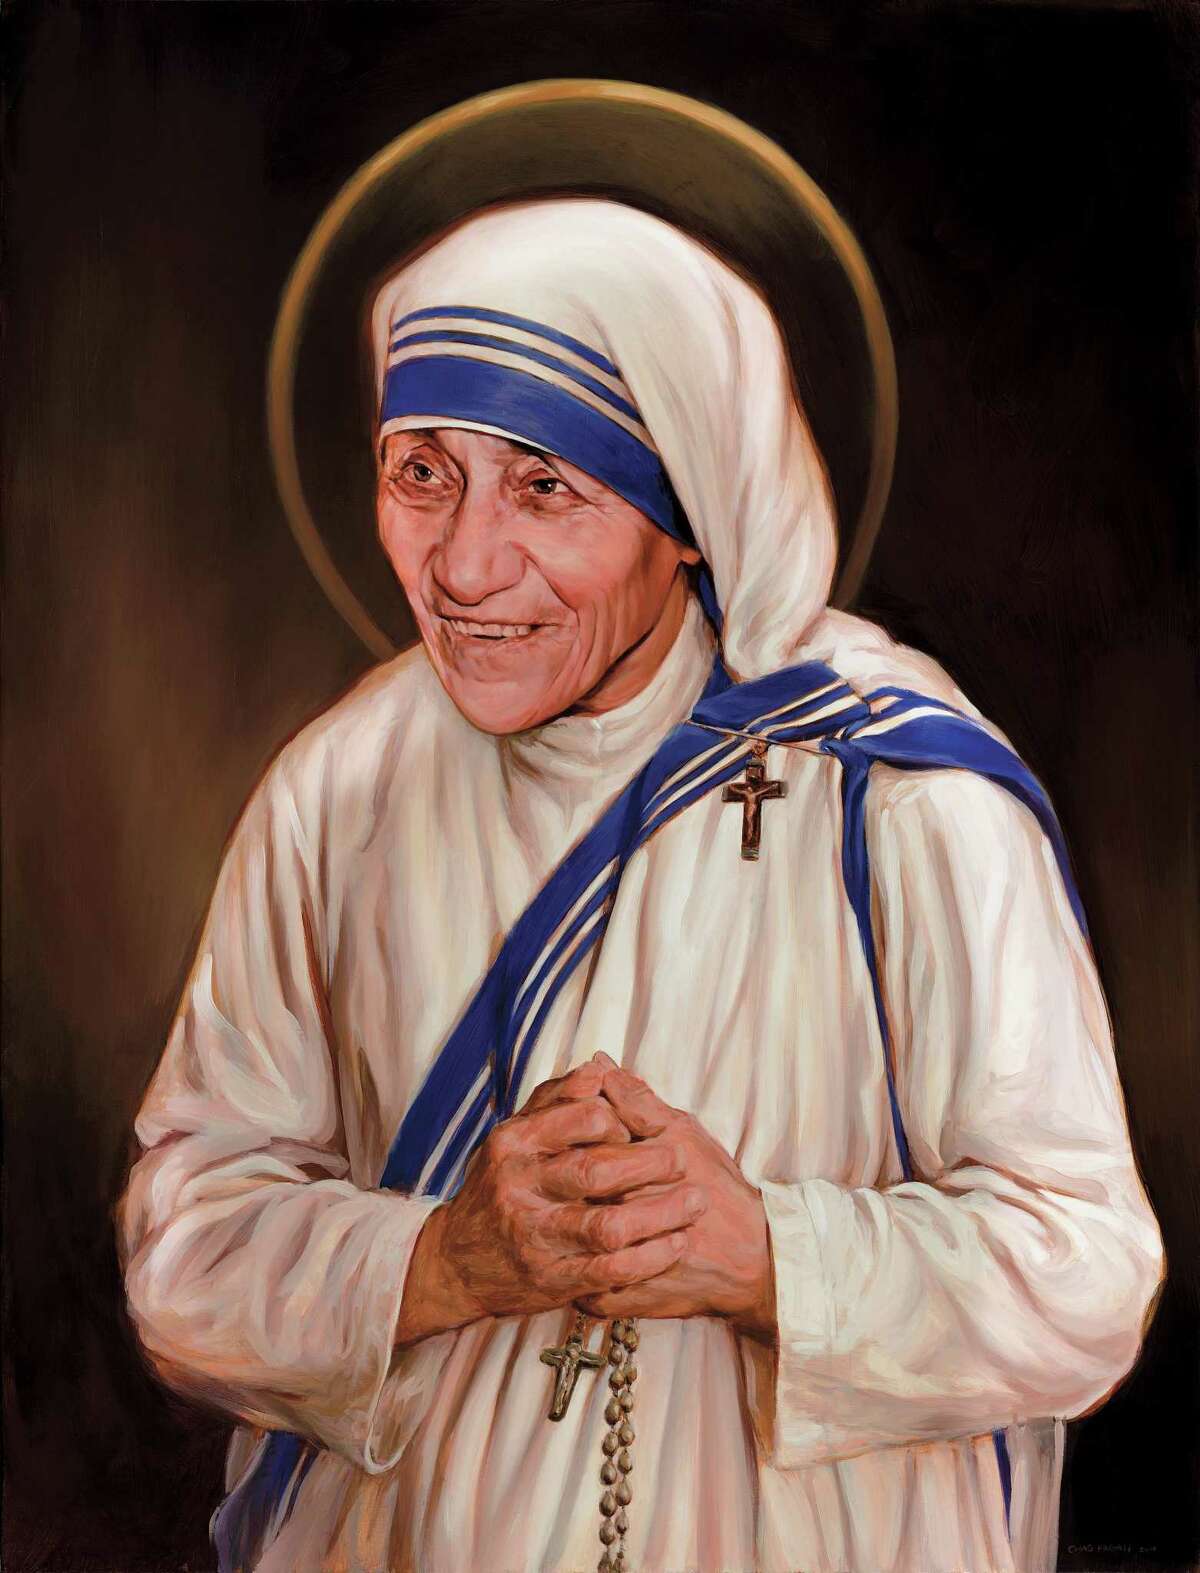 This photograph shows a reproduction of a 2016 painting by Chas Fagan "St. Teresa of Calcutta: Carrier of God's Love", depicting Mother Teresa, commissioned by the Knights of Columbus as a gift for the Missionaries of Charity, in Charlotte, NC, United States. The painting will be used as the official image of Mother Teresa during her canonization ceremony in St. Peters' Square, at the Vatican next Sunday, Sept. 1, 2016.